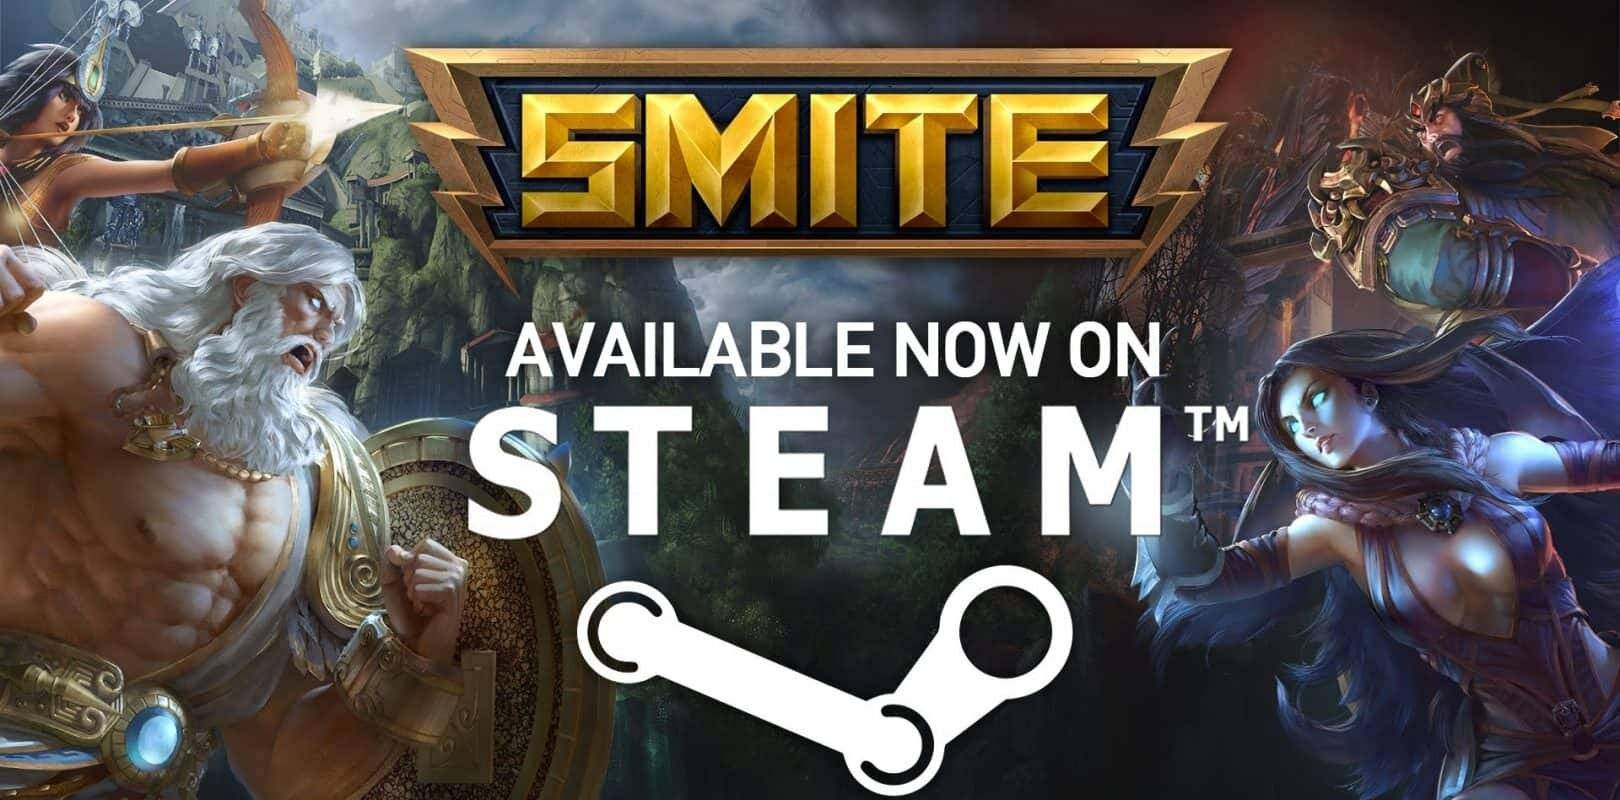 How to Logout of Smite on Steam? | 4 Simple Steps - HHOWTO